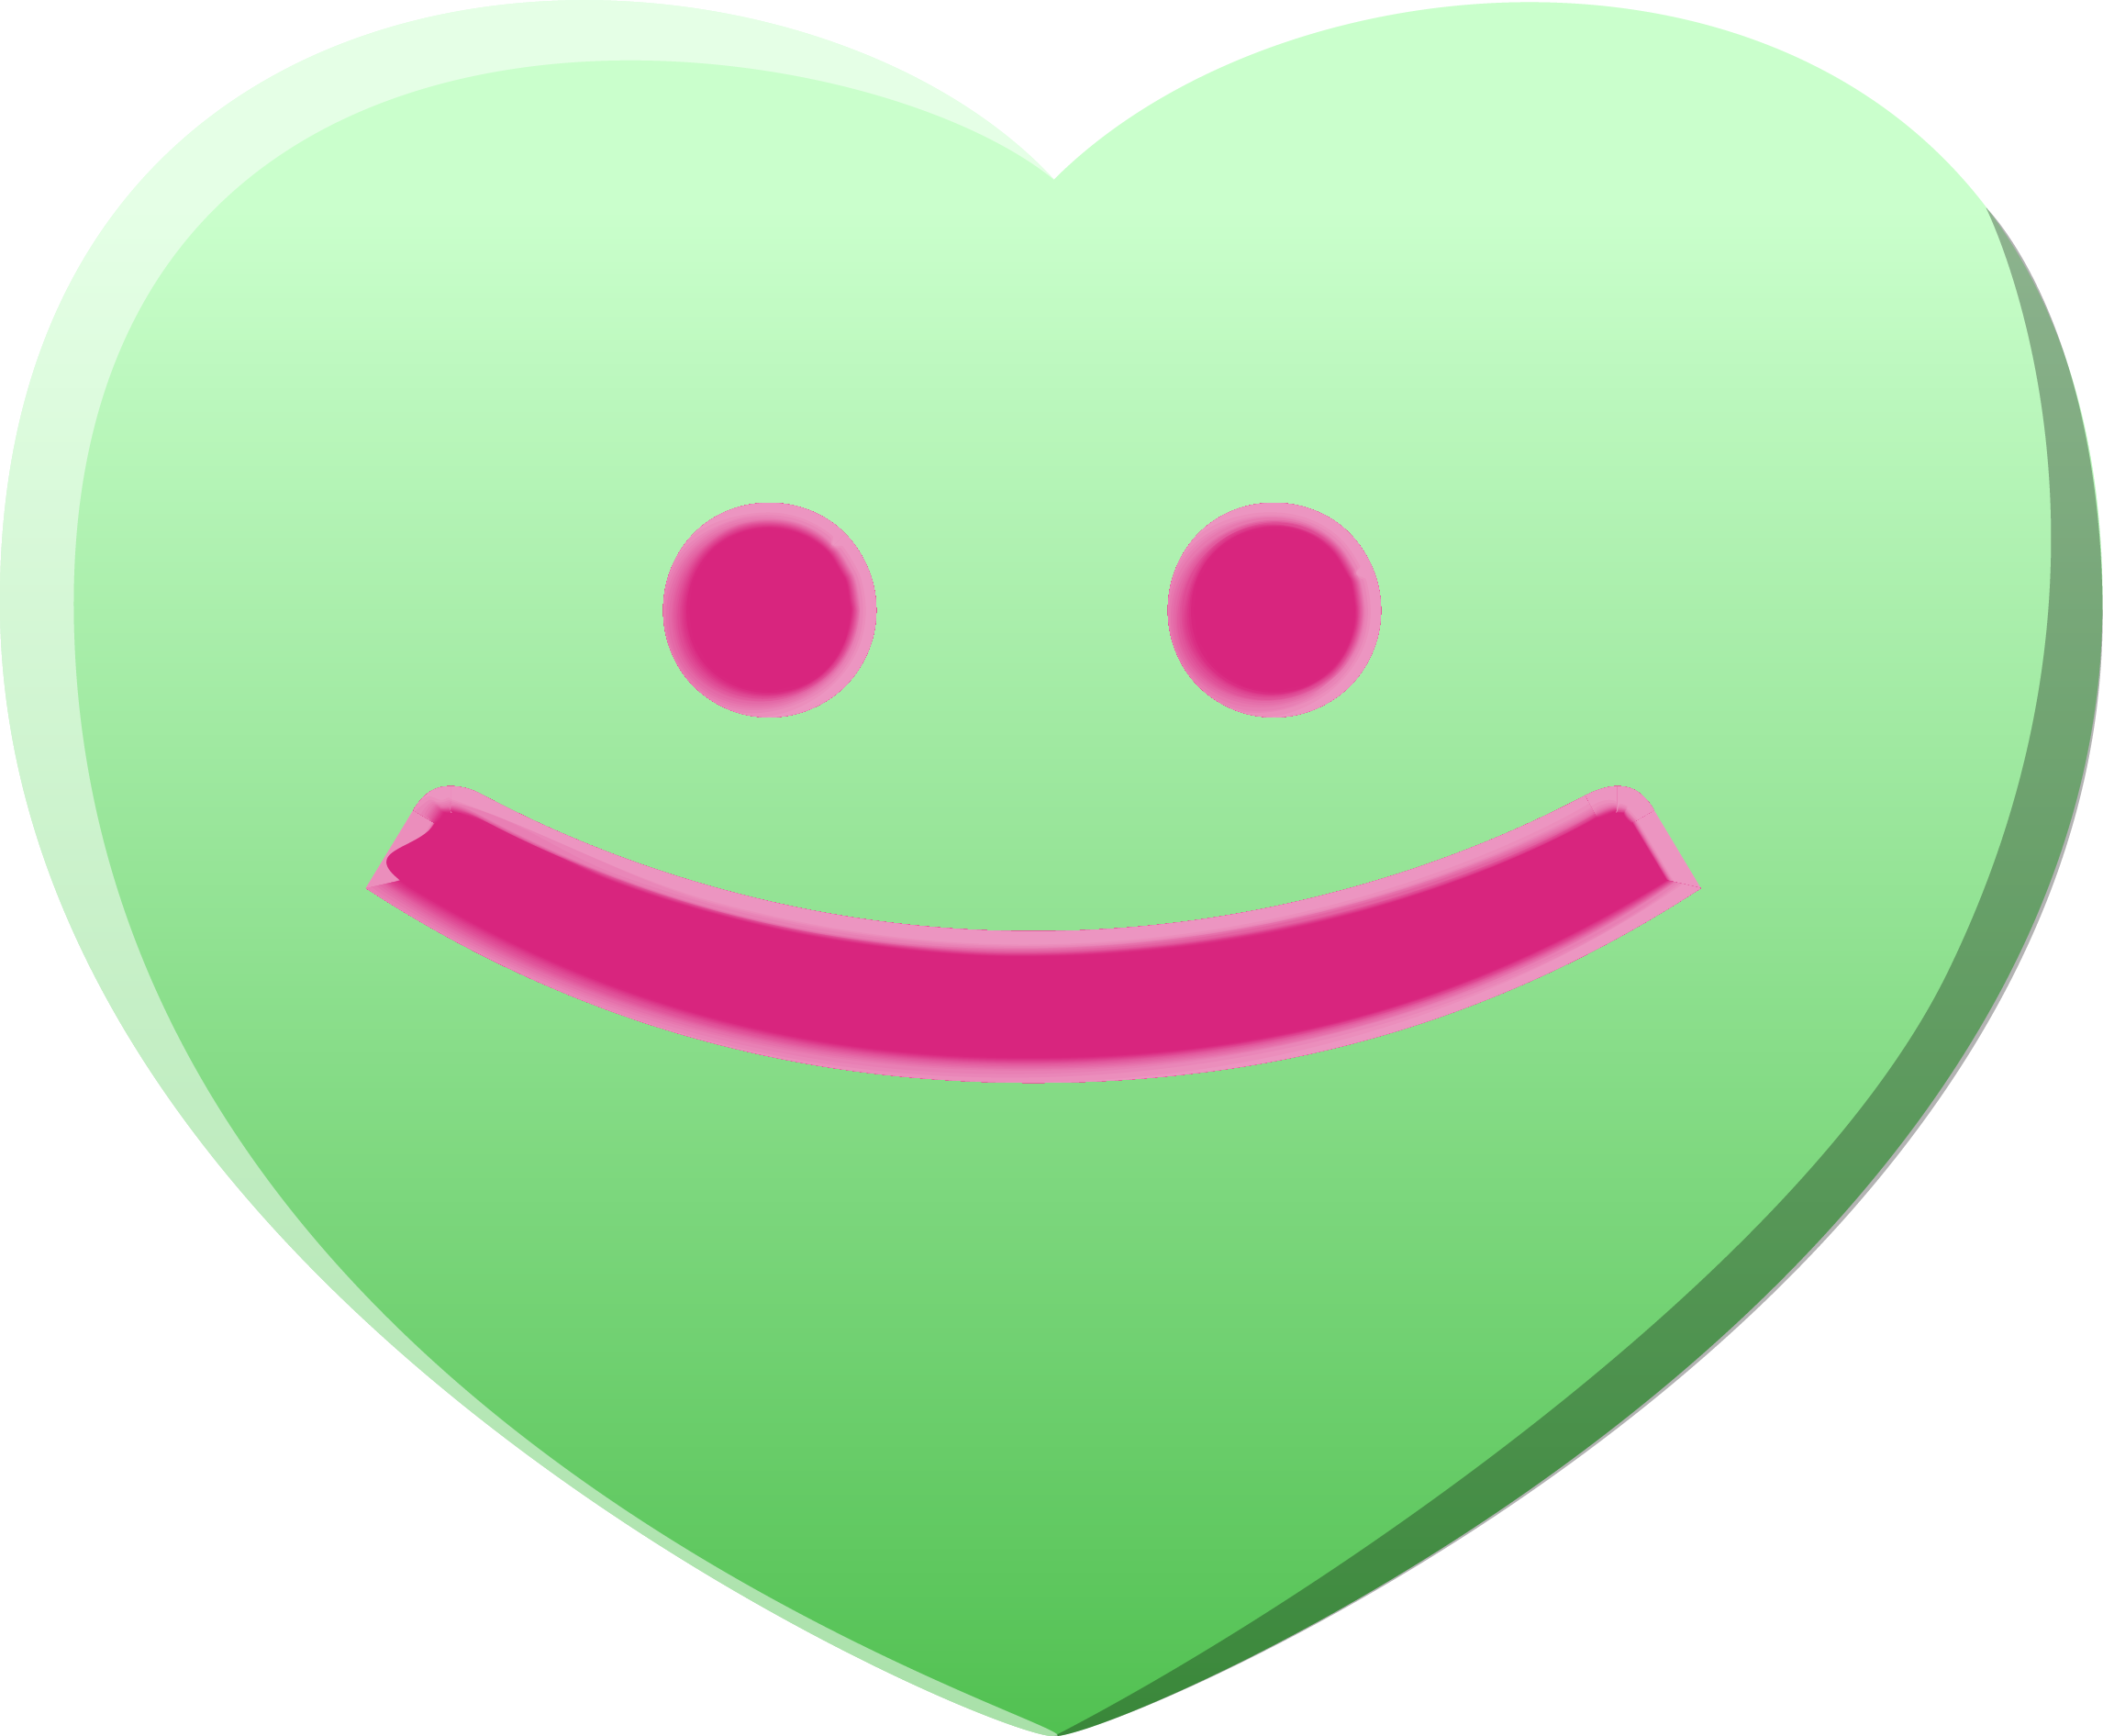 free smiley heart clipart - photo #24